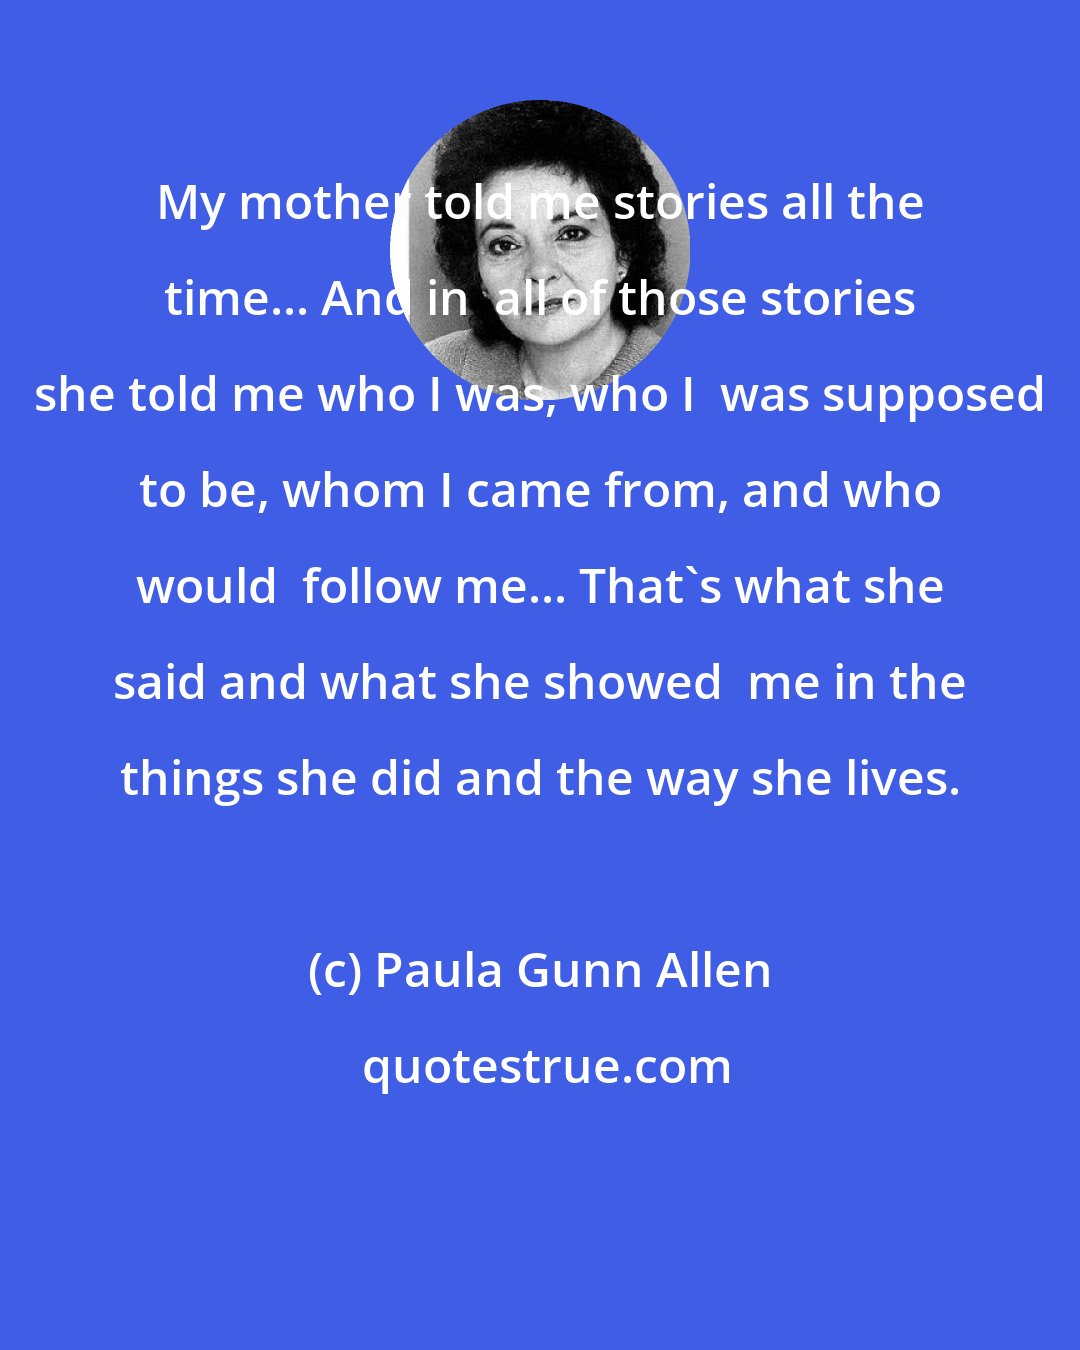 Paula Gunn Allen: My mother told me stories all the time... And in  all of those stories she told me who I was, who I  was supposed to be, whom I came from, and who would  follow me... That's what she said and what she showed  me in the things she did and the way she lives.